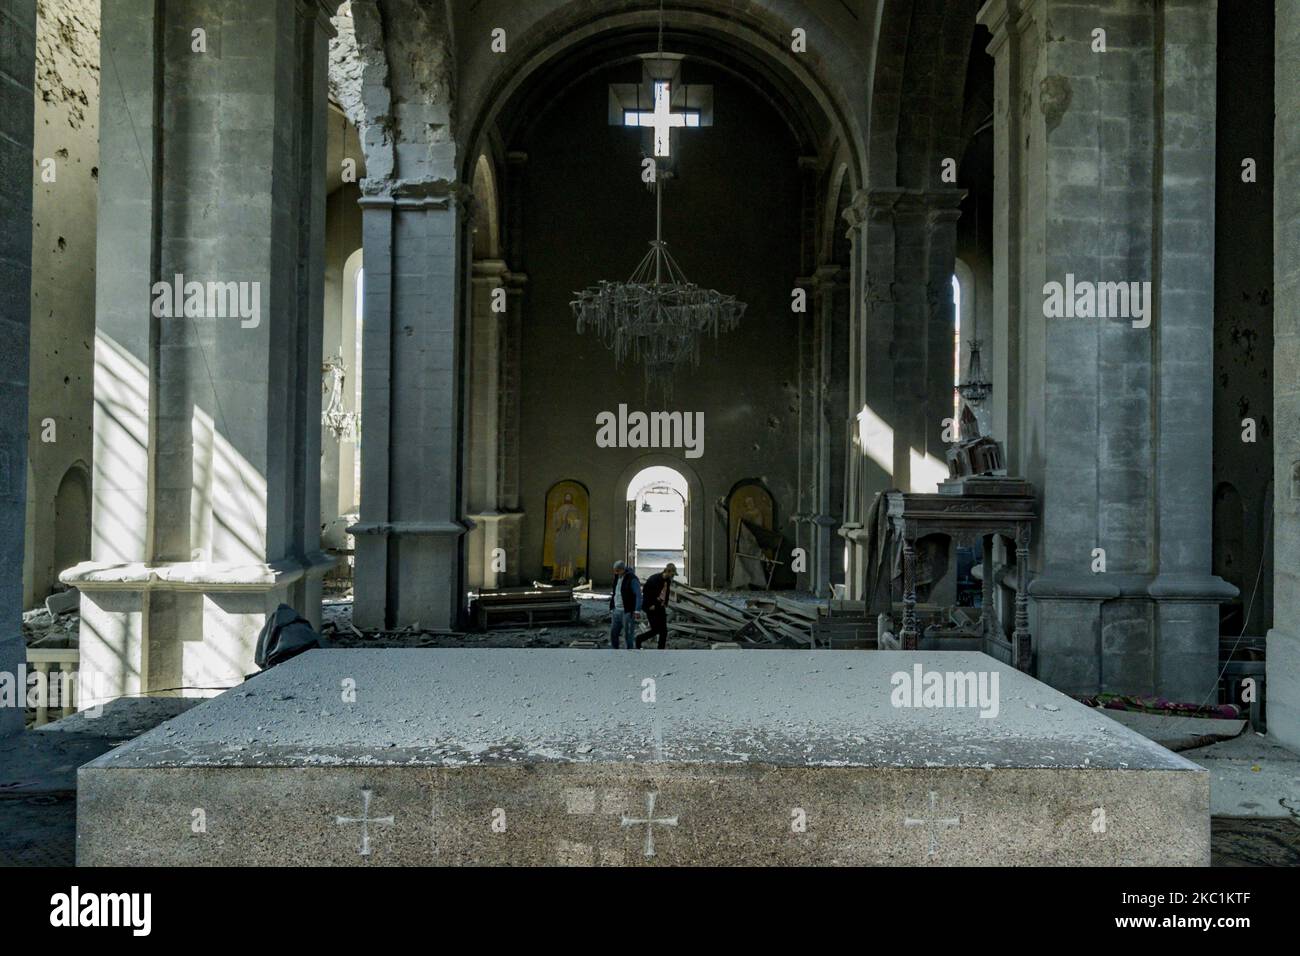 Altar of the destroyed Ghazanchetsots Cathedral in Shushi city, Nagorno Karabakh, after the Azerbaijan shelling of the church in a double attack on October 11, 2020. (Photo by Celestino Arce/NurPhoto) Stock Photo